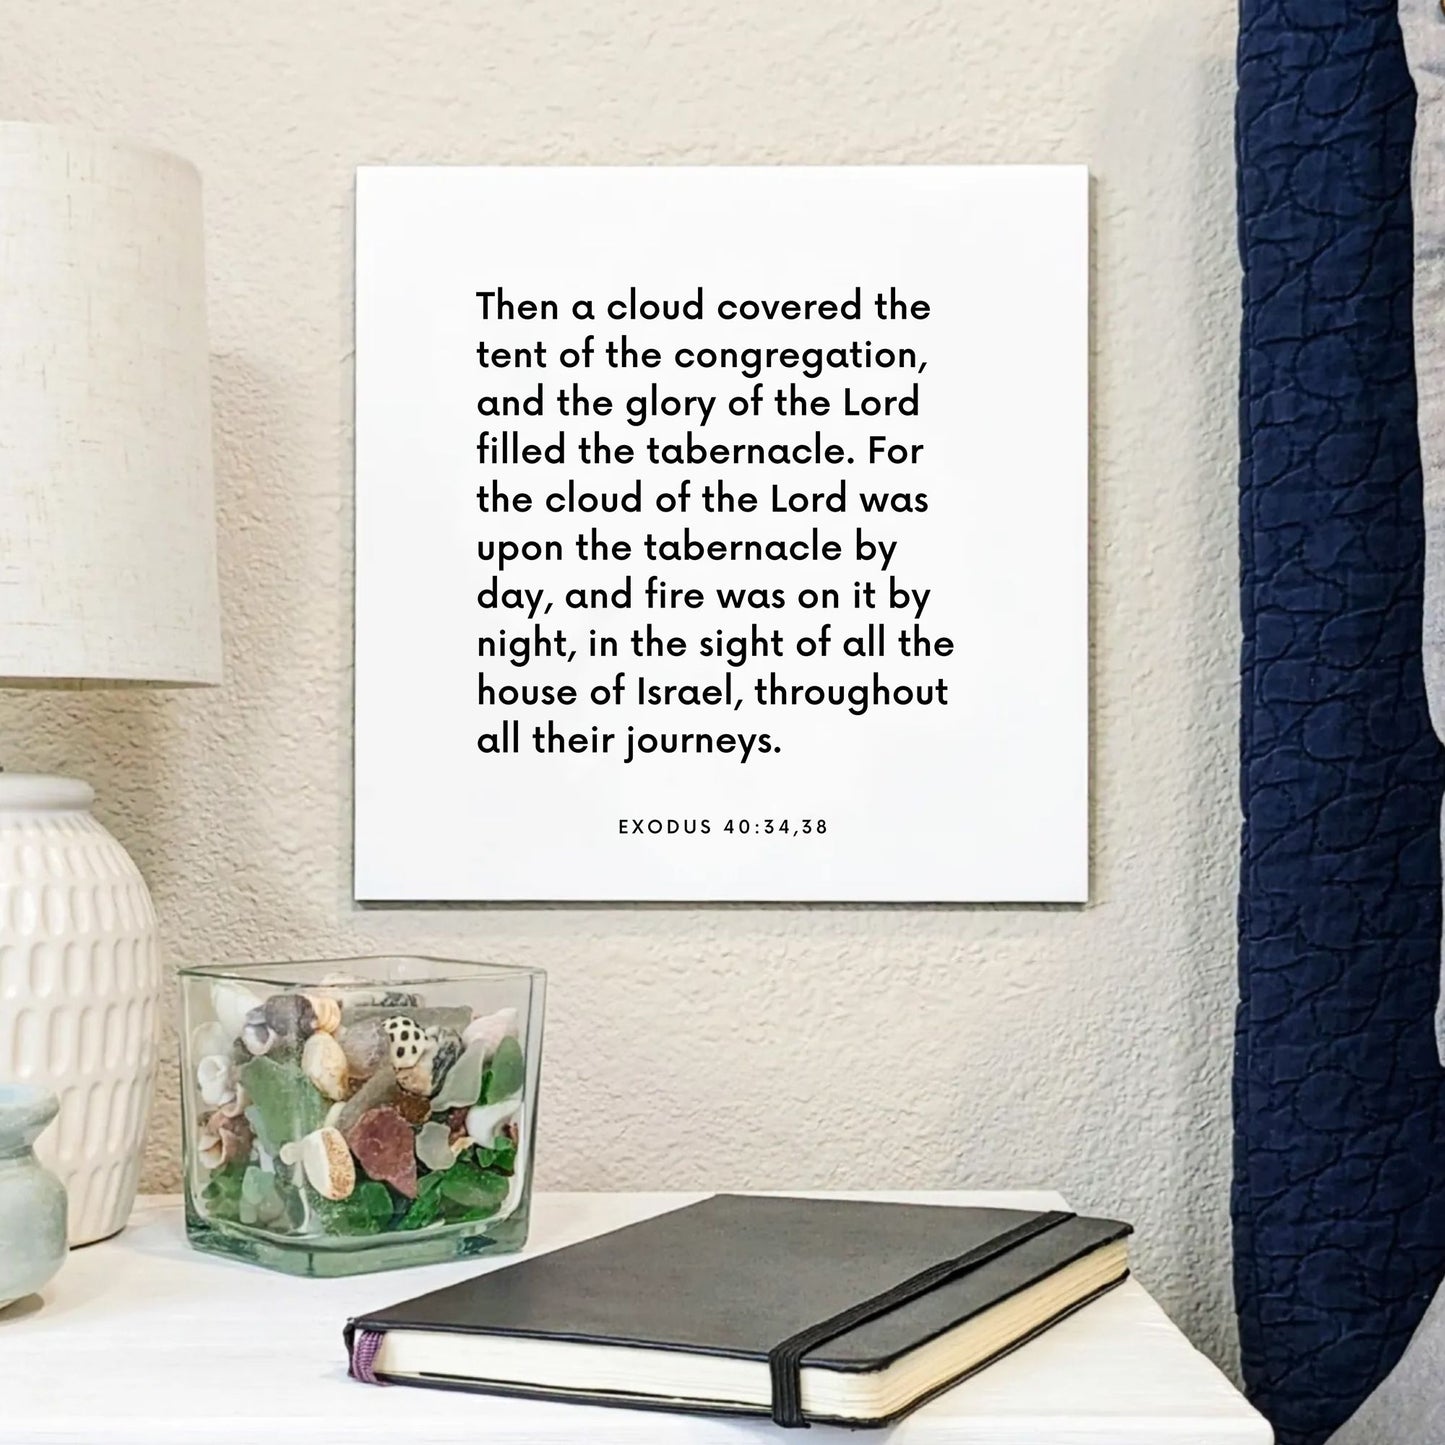 Bedside mouting of the scripture tile for Exodus 40:34,38 - "The glory of the Lord filled the tabernacle"